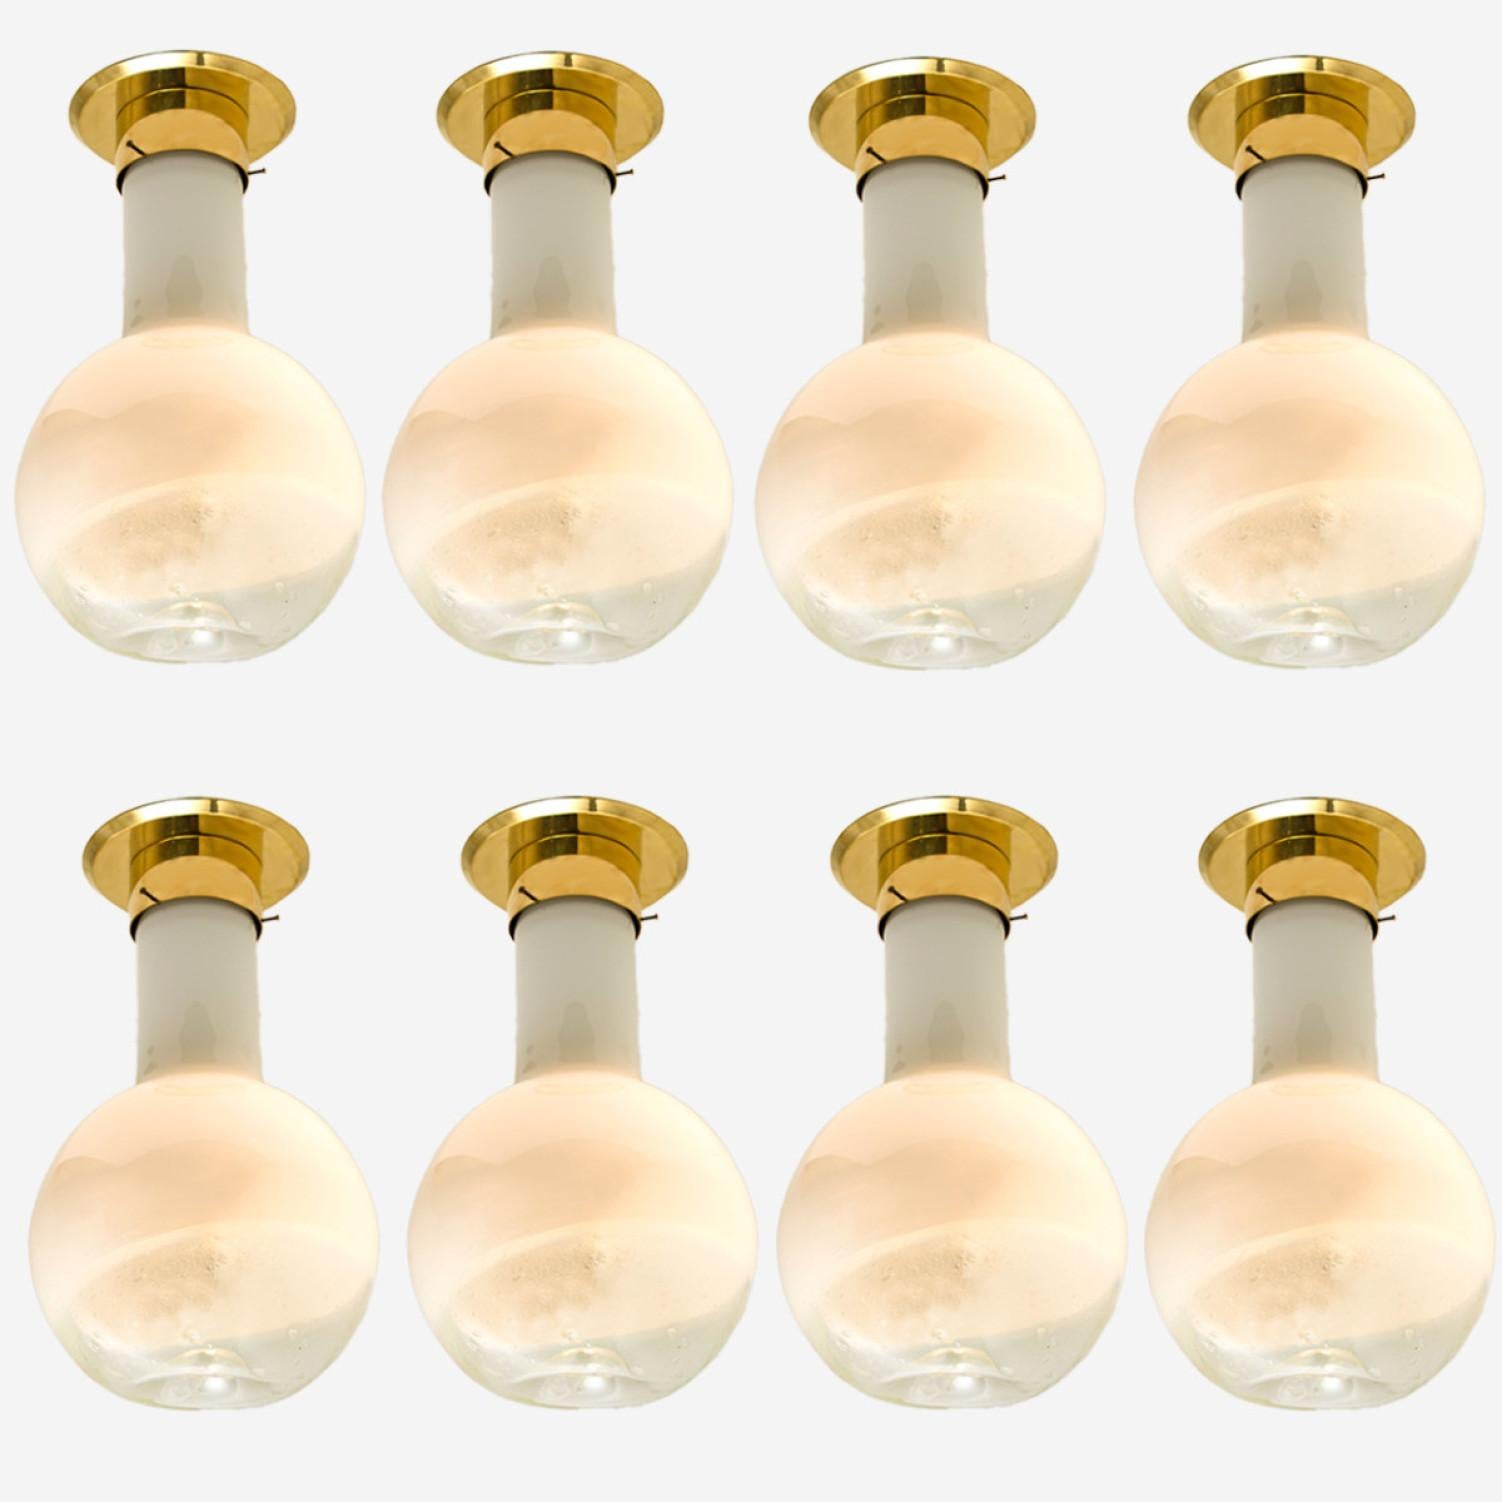 Several Handblown Ceiling Lamps from Harrachov, 1970s For Sale 3